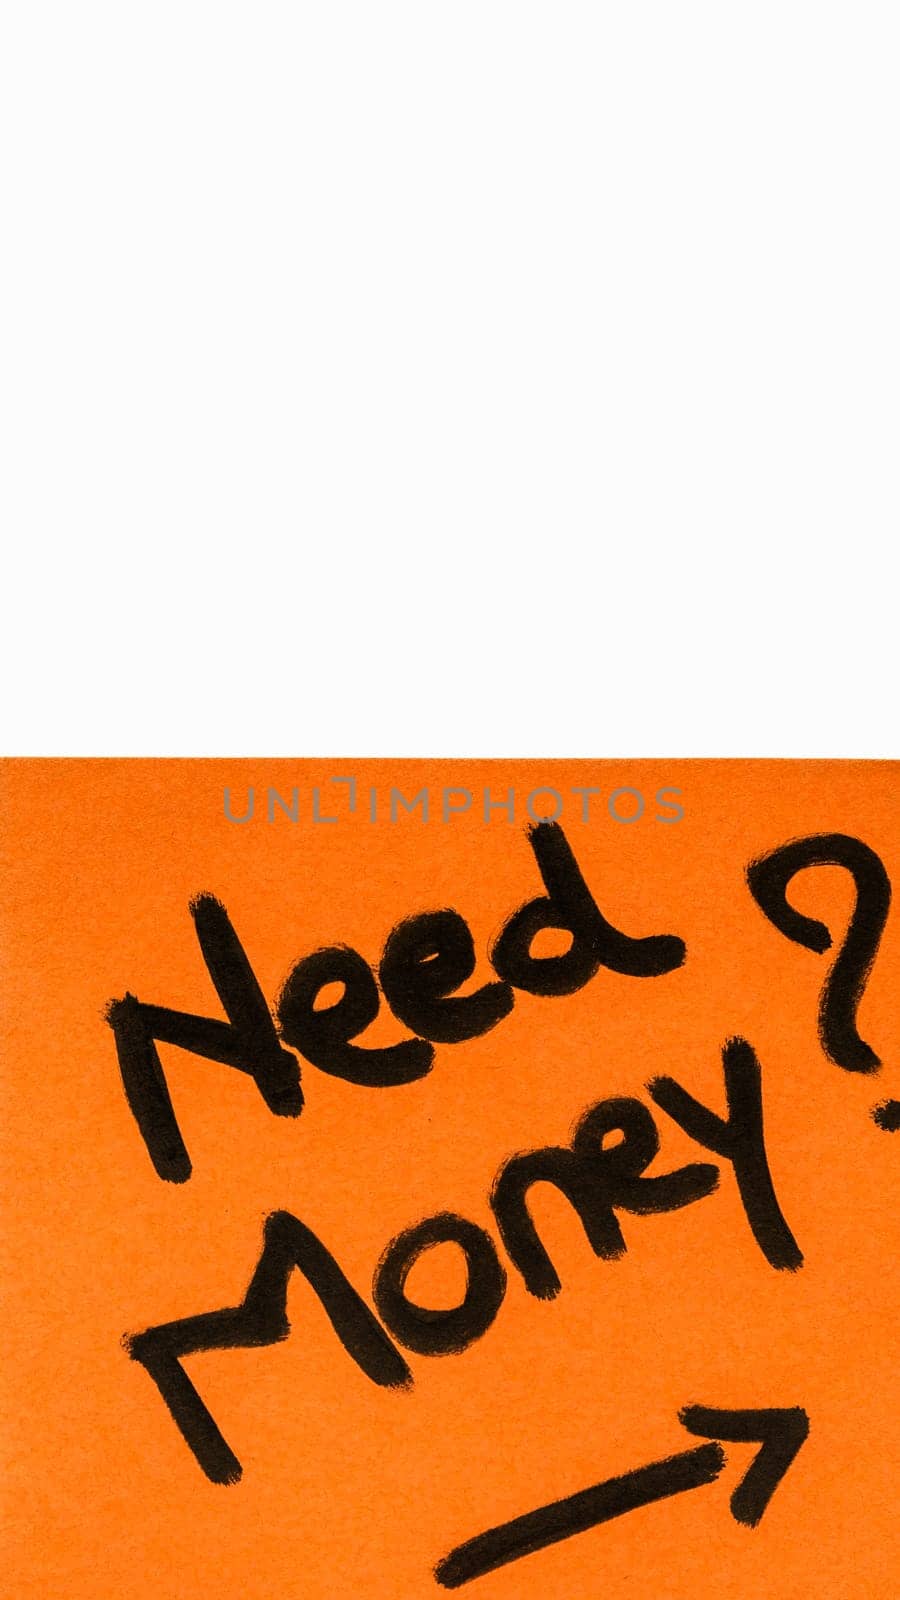 Need money handwriting text close up isolated on orange paper with copy space.